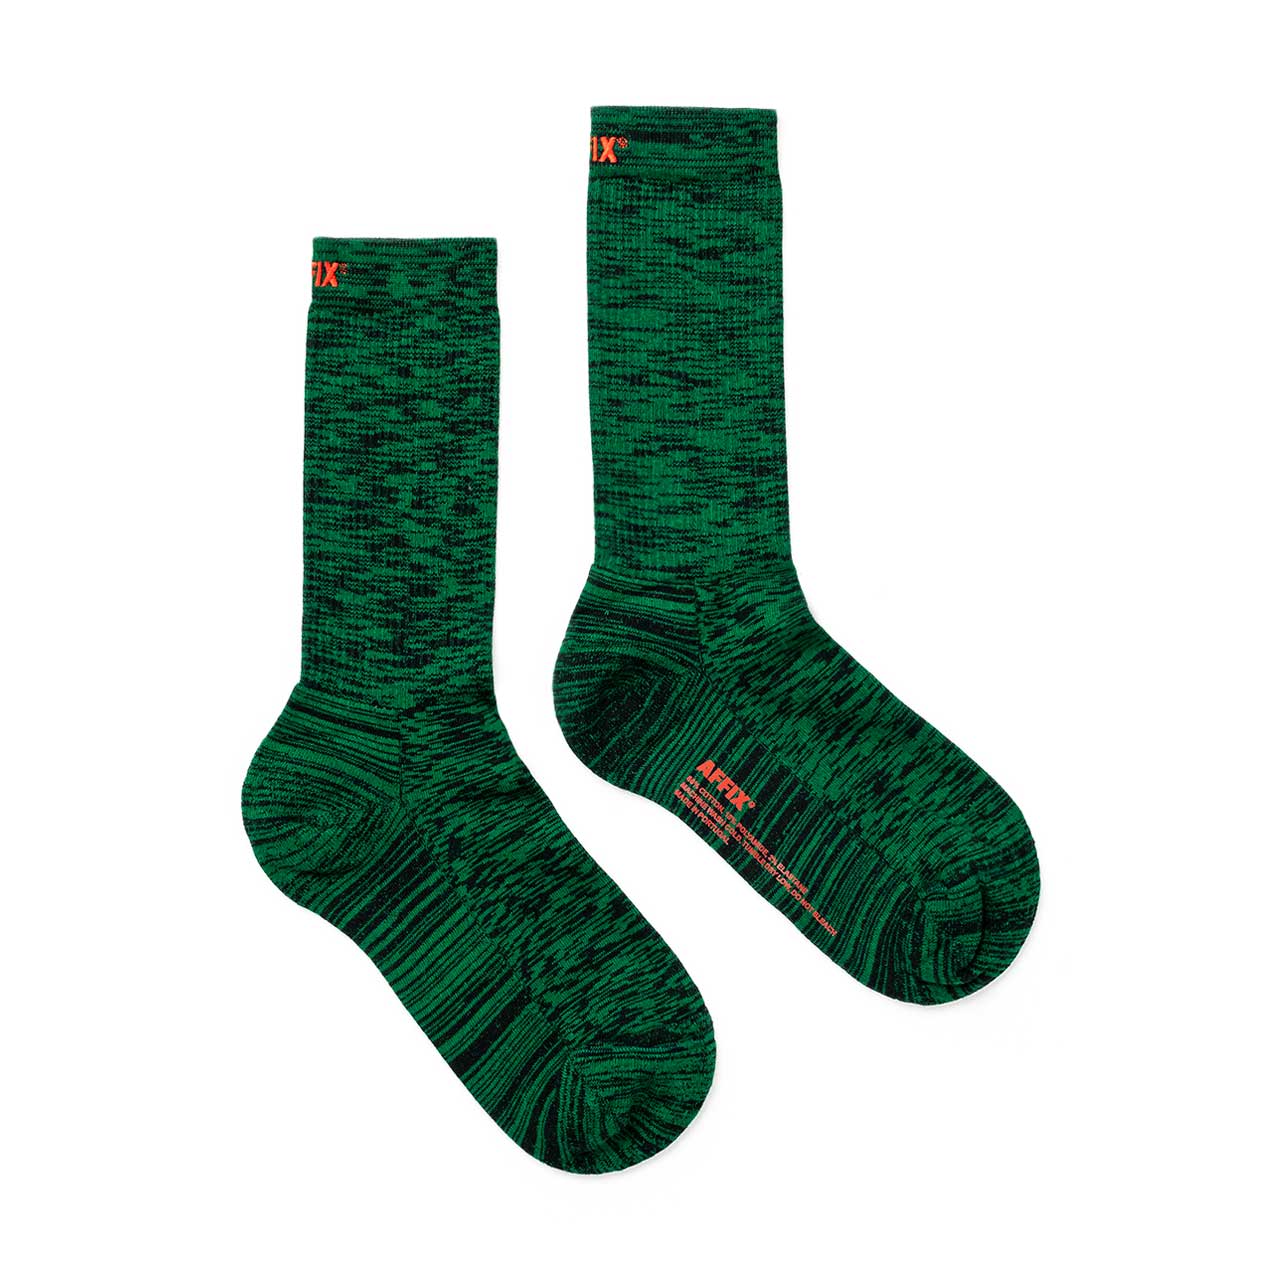 affix static sock 3 pack (red / green / blue) - aw20acc15 - a.plus - Image - 3